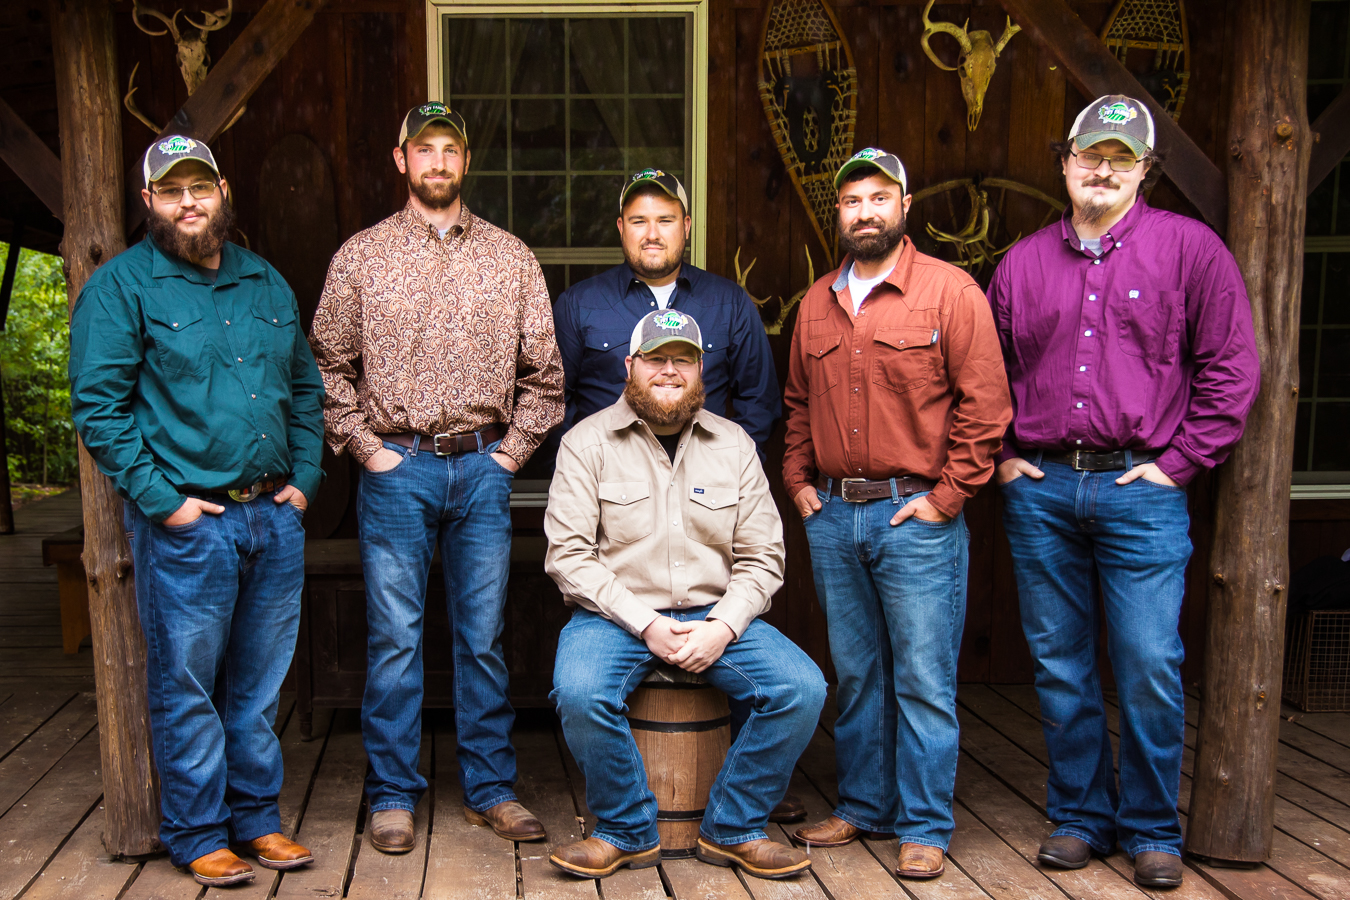 pa wedding photographer, lisa rhinehart, captures this portrait of the groom and his groomsmen dressed in all different colored button-down shirts, jeans and their boots during this country inspired wedding 